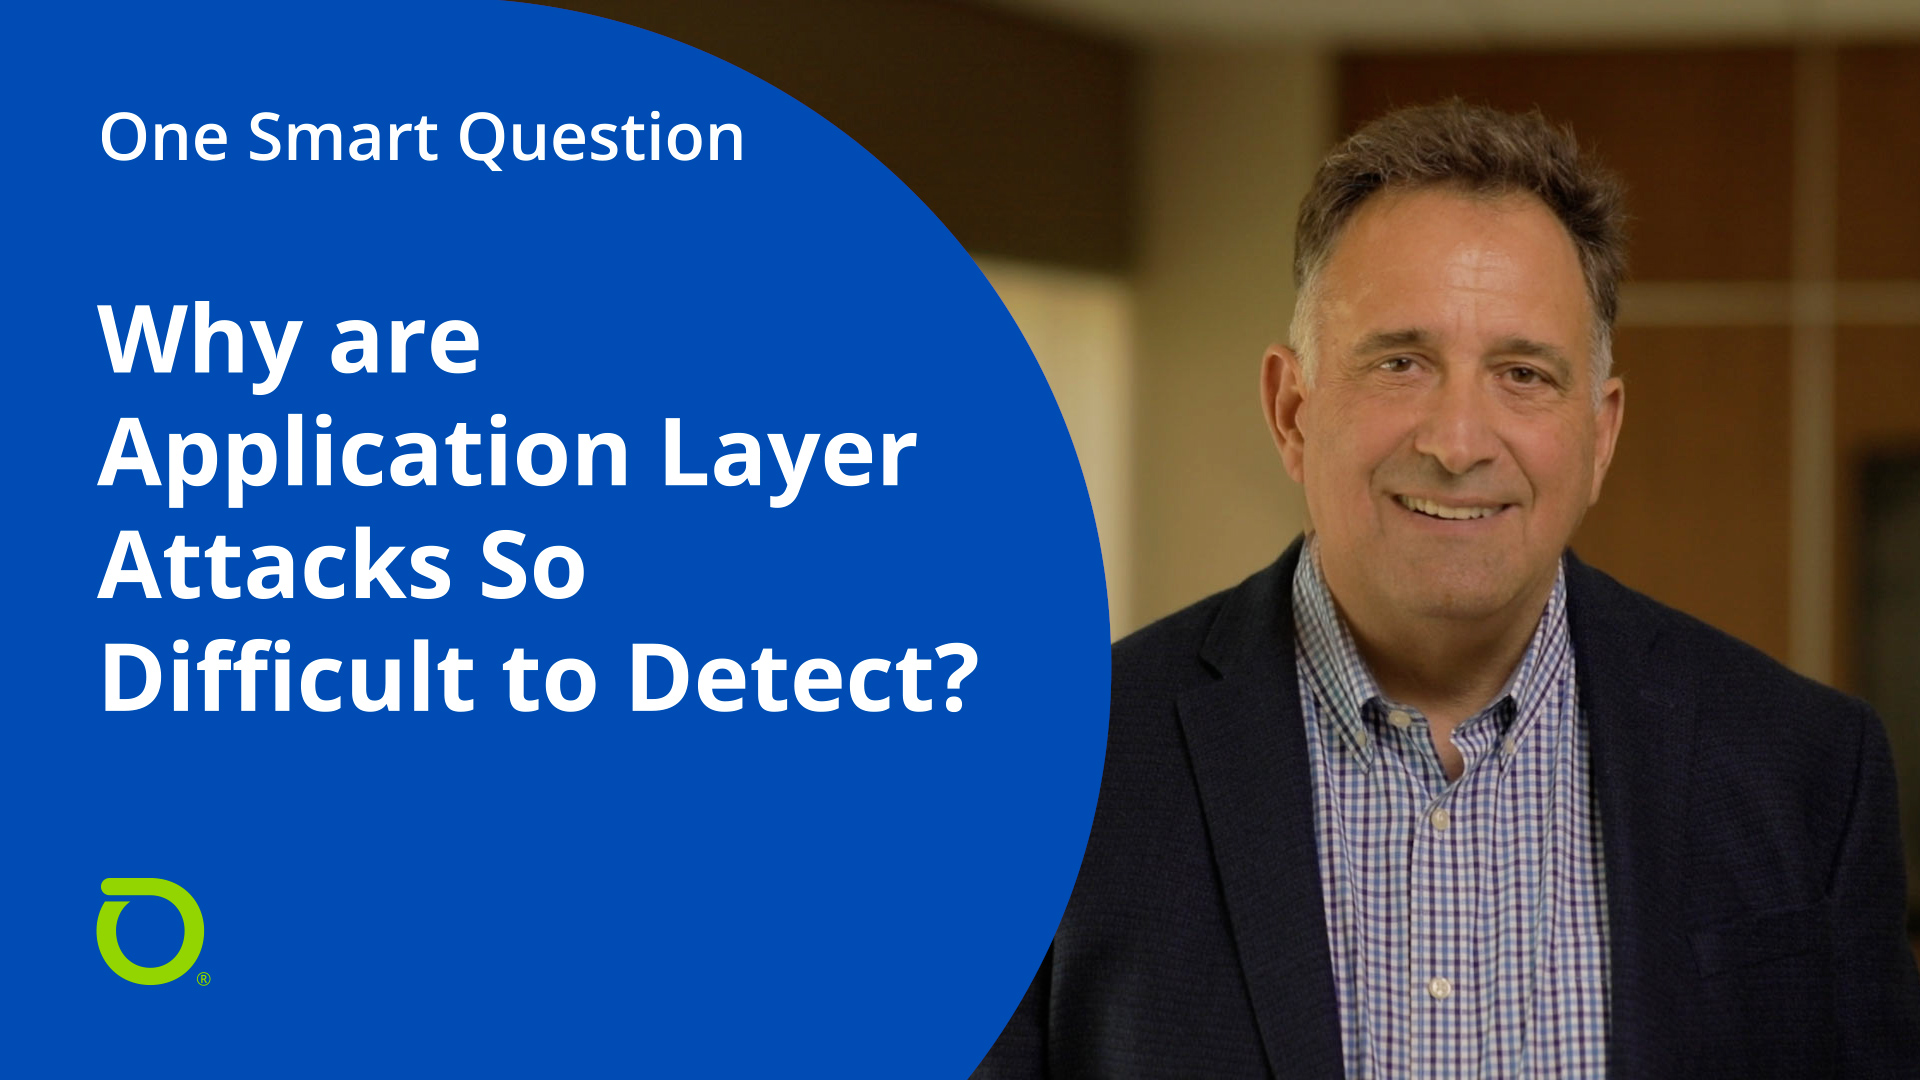 One Smart Question: Why are Application Layer Attacks so Difficult to Detect?